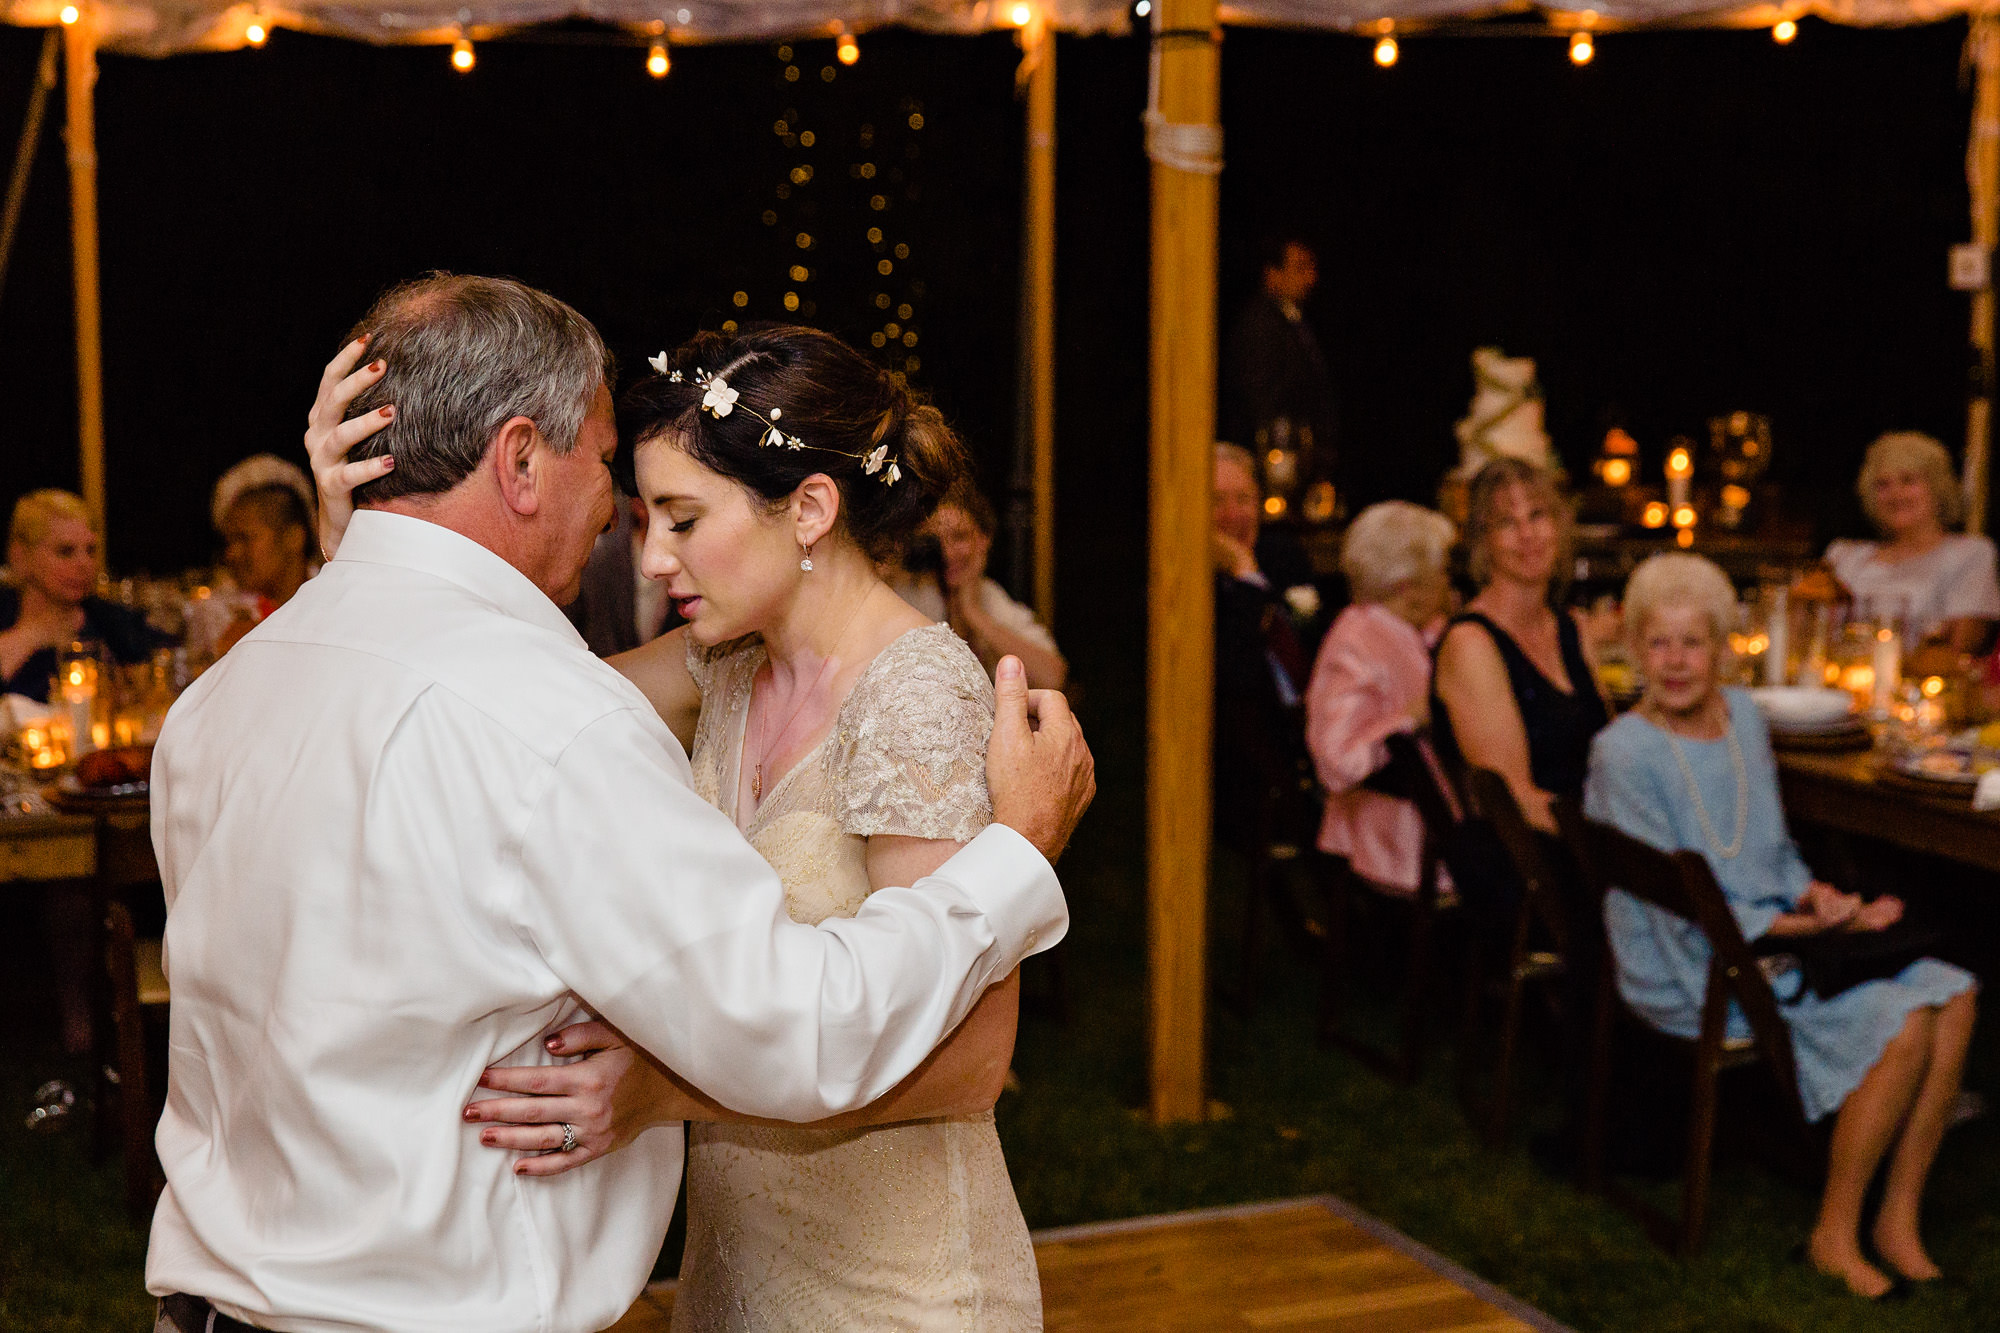 A father and daughter dance at a wedding in Midcoast Maine